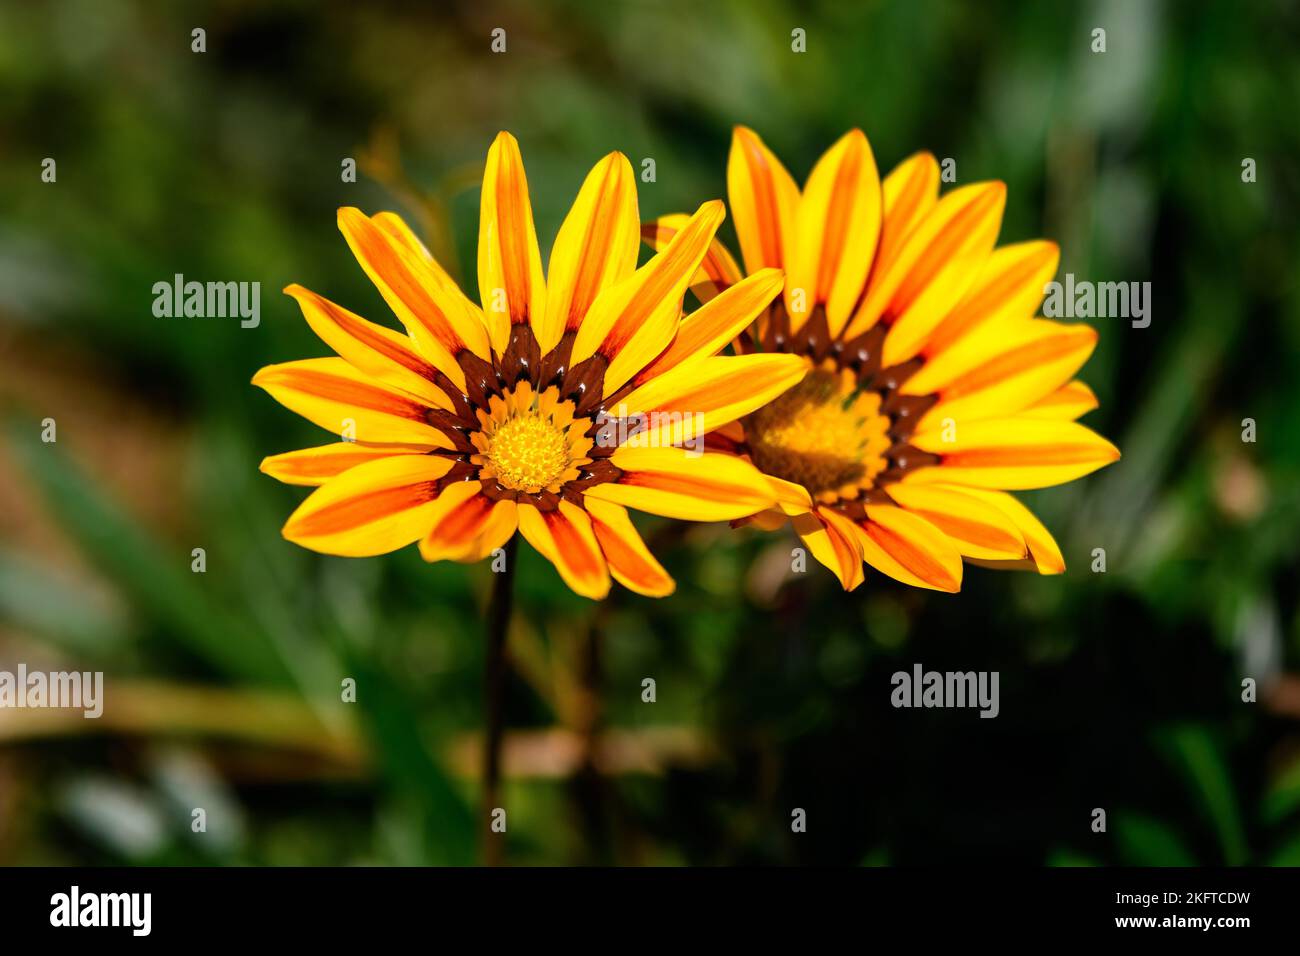 Top view of two vivid yellow and orange gazania flowers and blurred green leaves in soft focus, in a garden in a sunny summer day, beautiful outdoor f Stock Photo